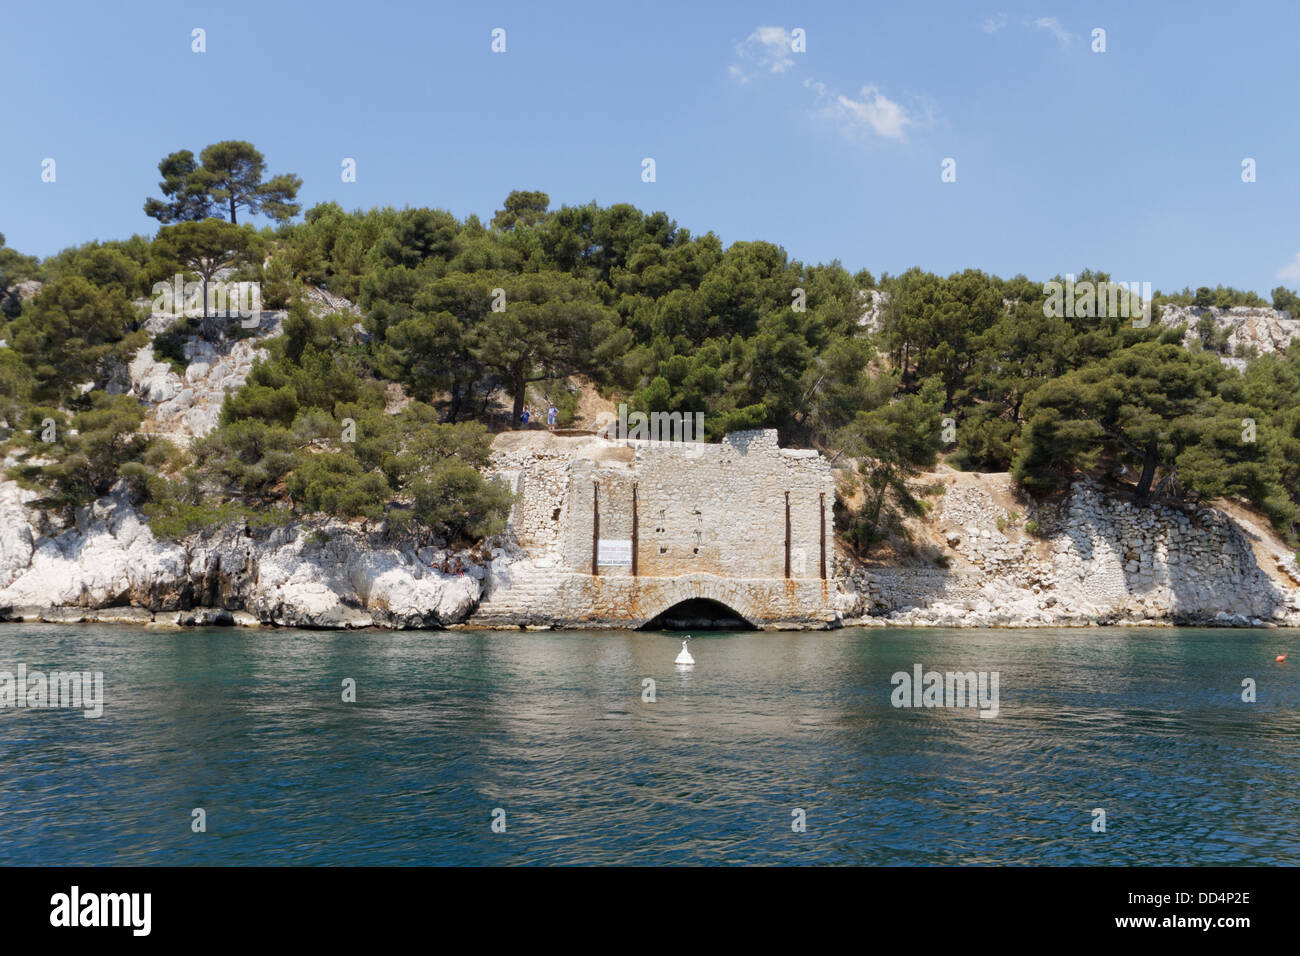 Europe, France, Bouche-du-Rhone, Cassis Calanques of Port Miou Stock Photo